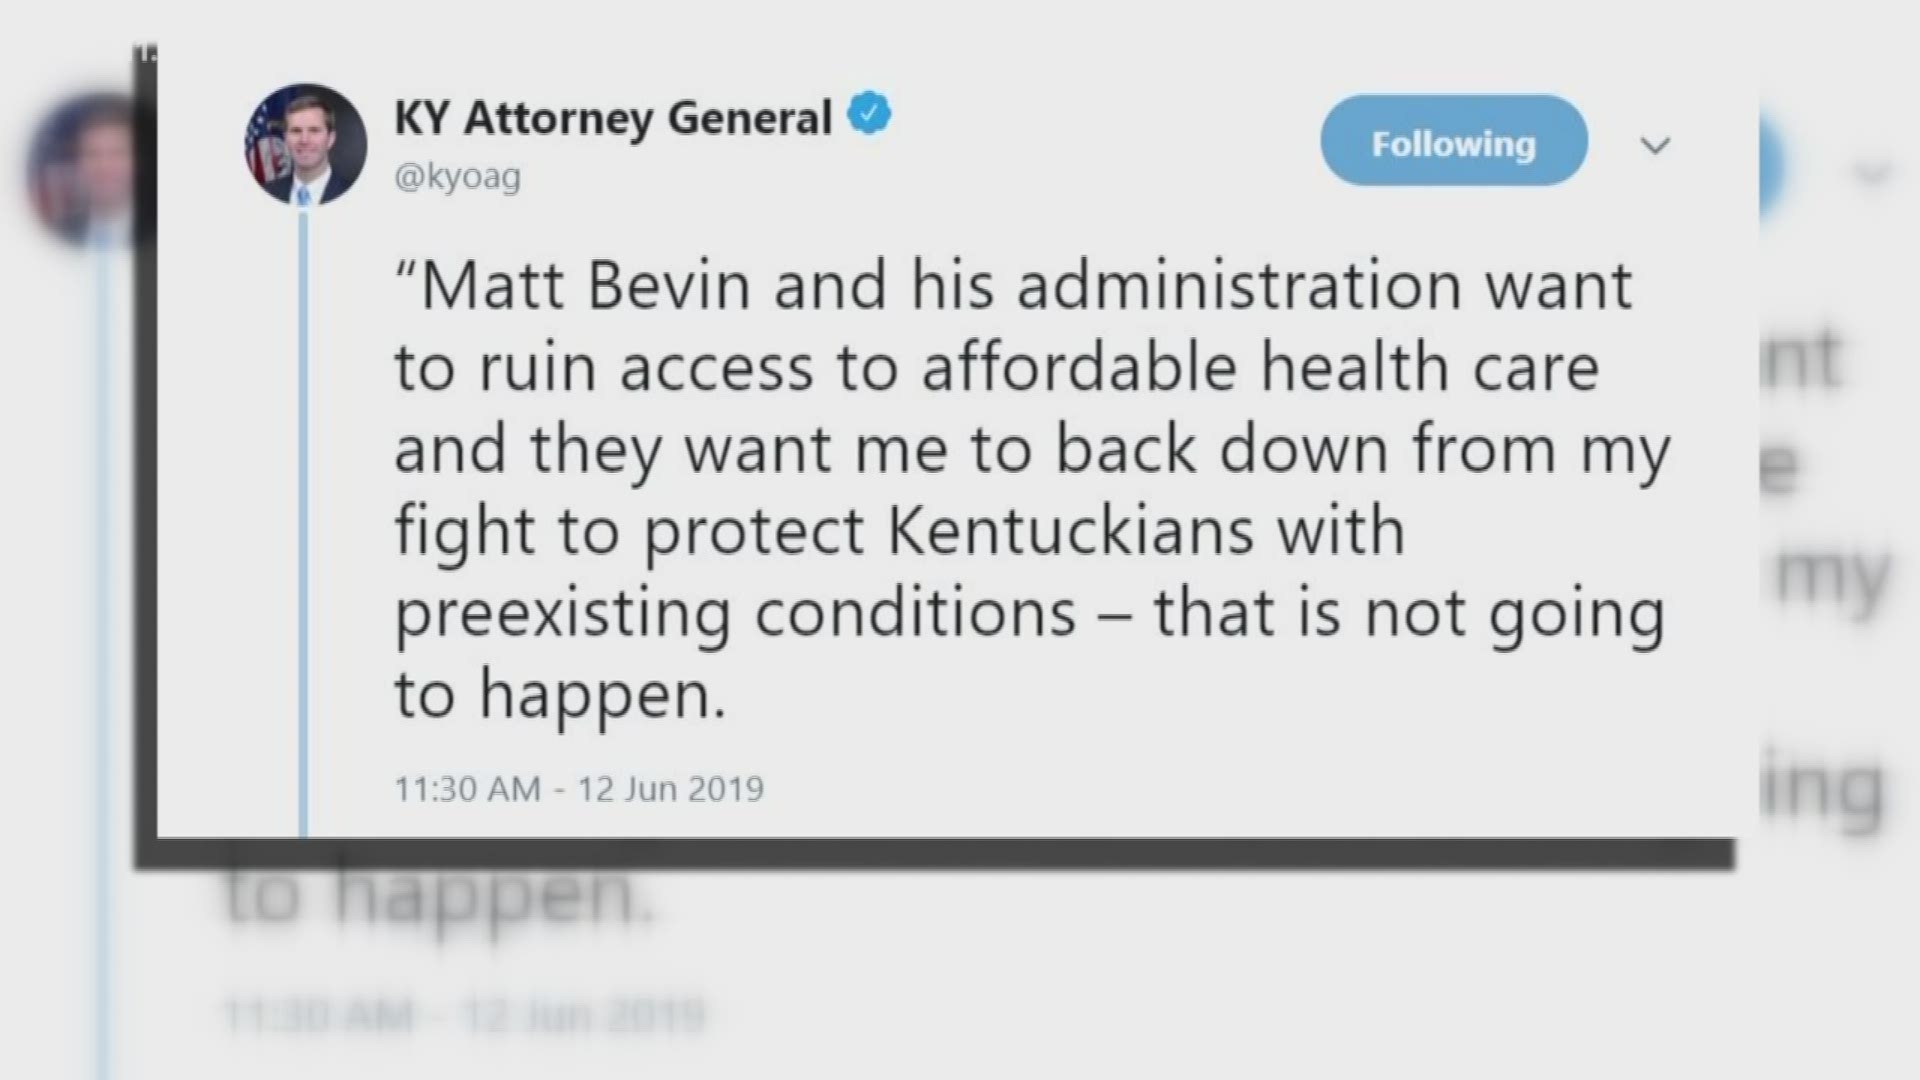 "Where Beshear is absolutely wrong on this is he says preexisting conditions wouldn't be protected, he's absolutely wrong. "